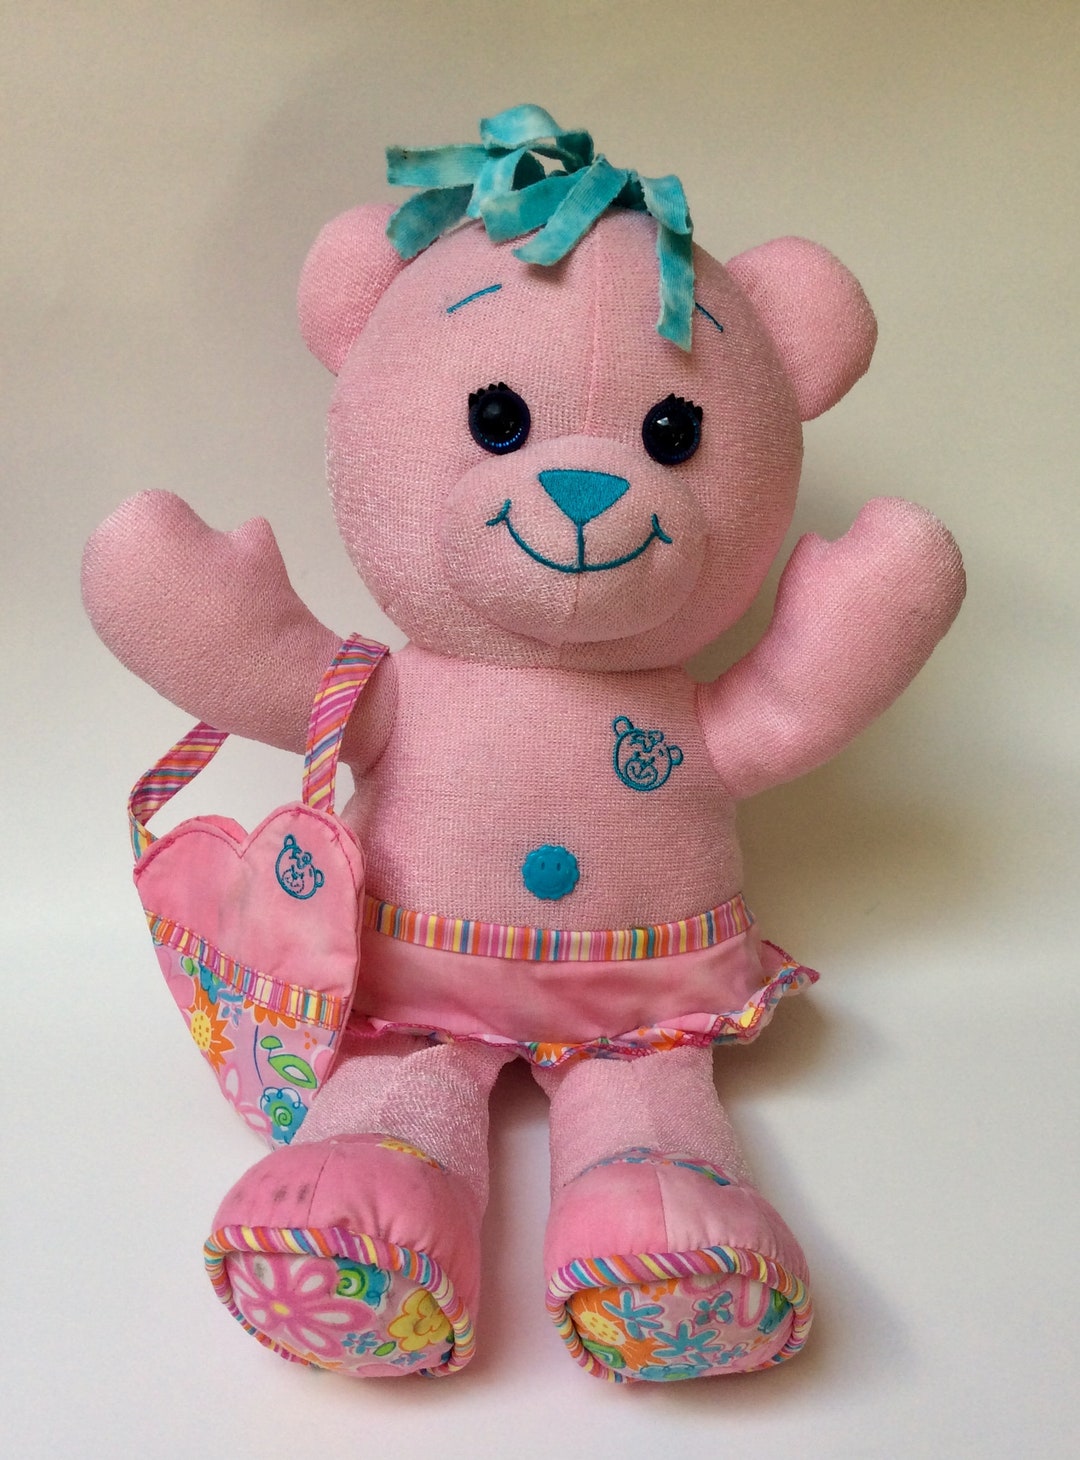 Used Doodle Bear. See images for details. Comes with